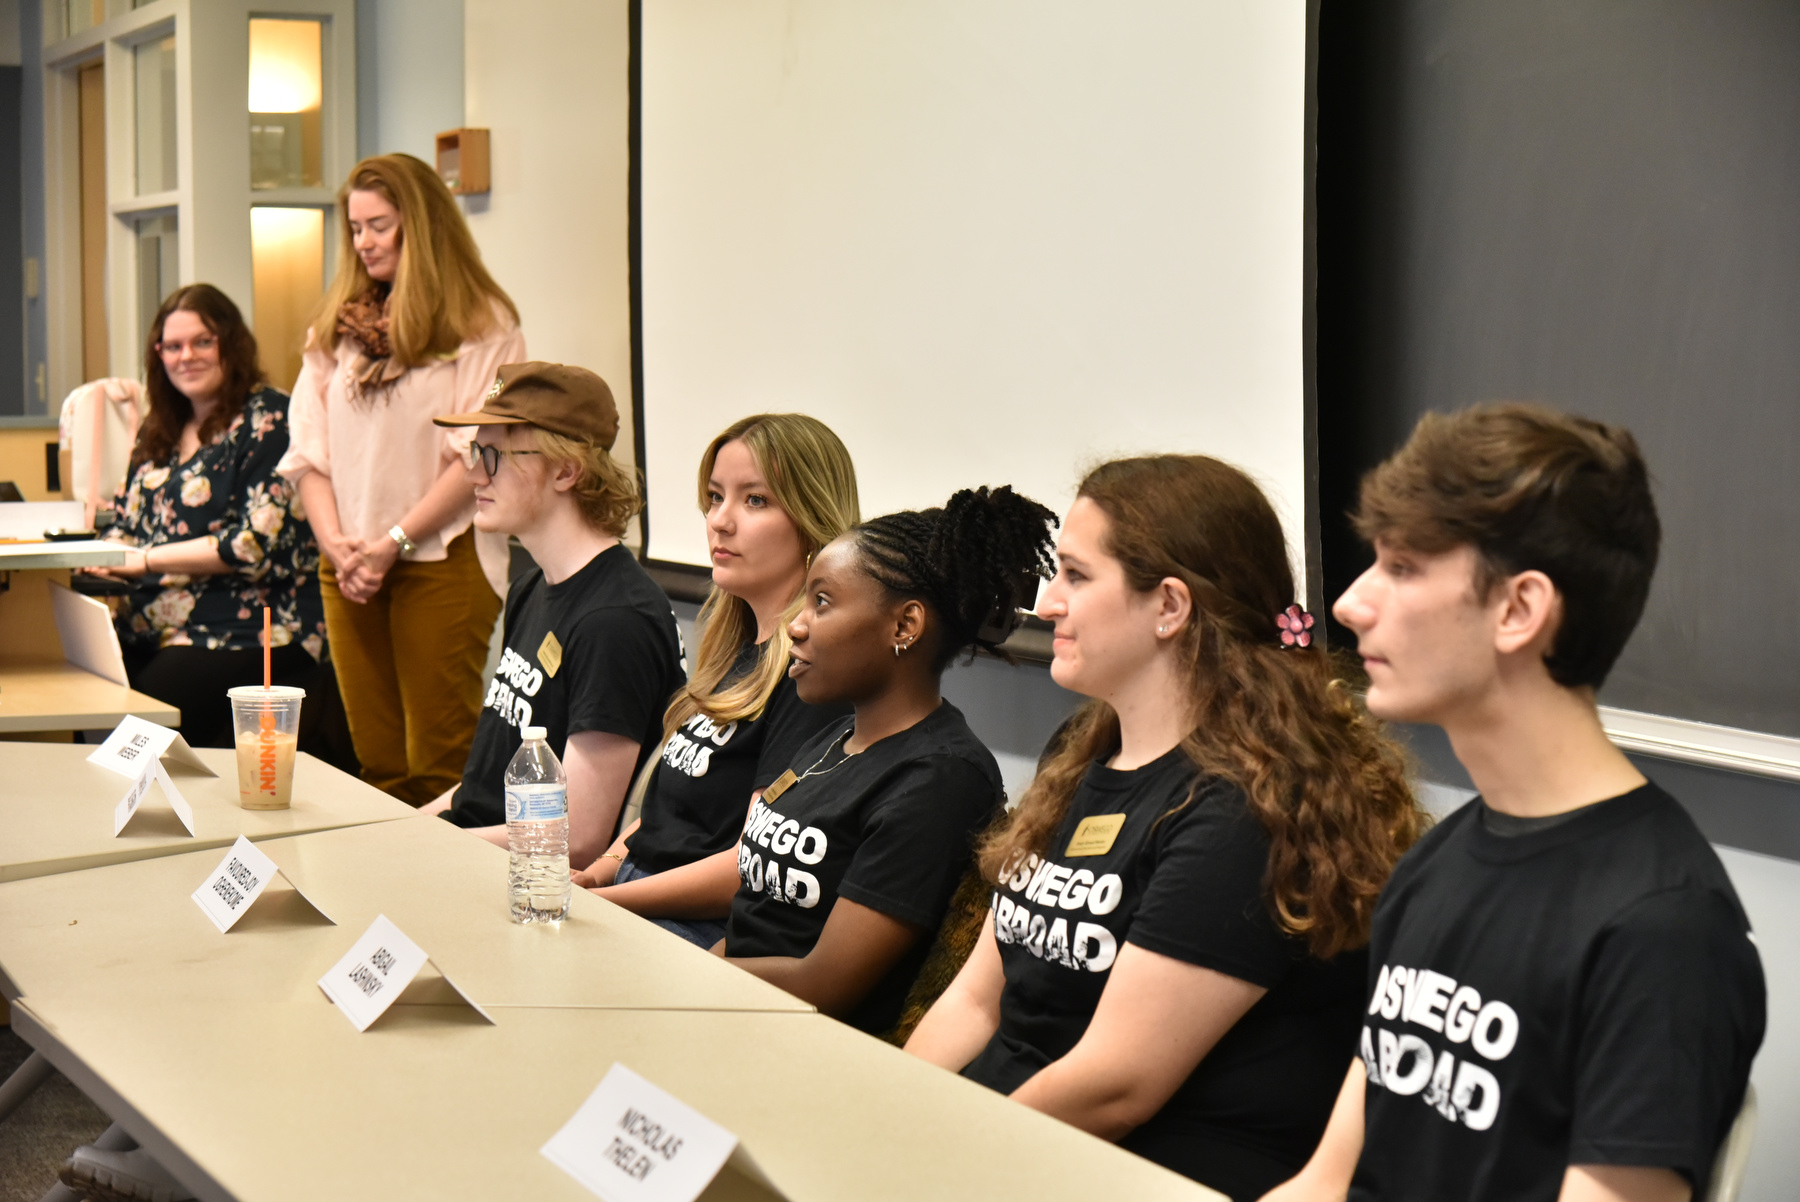 “I, Too, Am Study Abroad” students, hosted by the Office of International Education and Programs, held a panel discussion during Quest on how students can finance their study abroad experience. 